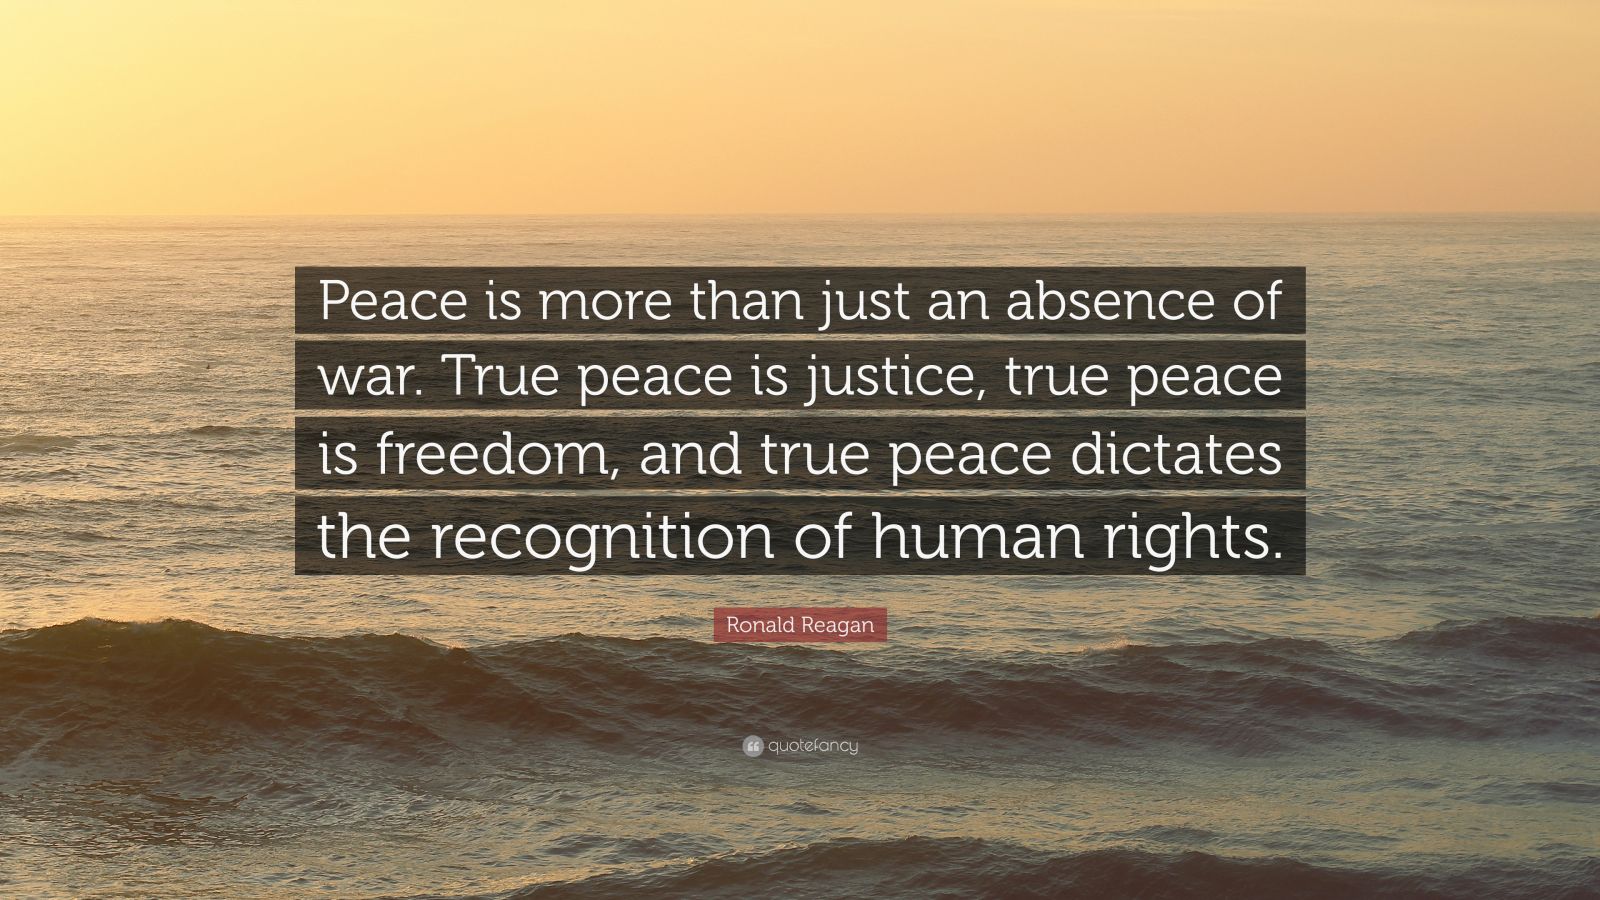 Ronald Reagan Quote: “Peace is more than just an absence of war. True